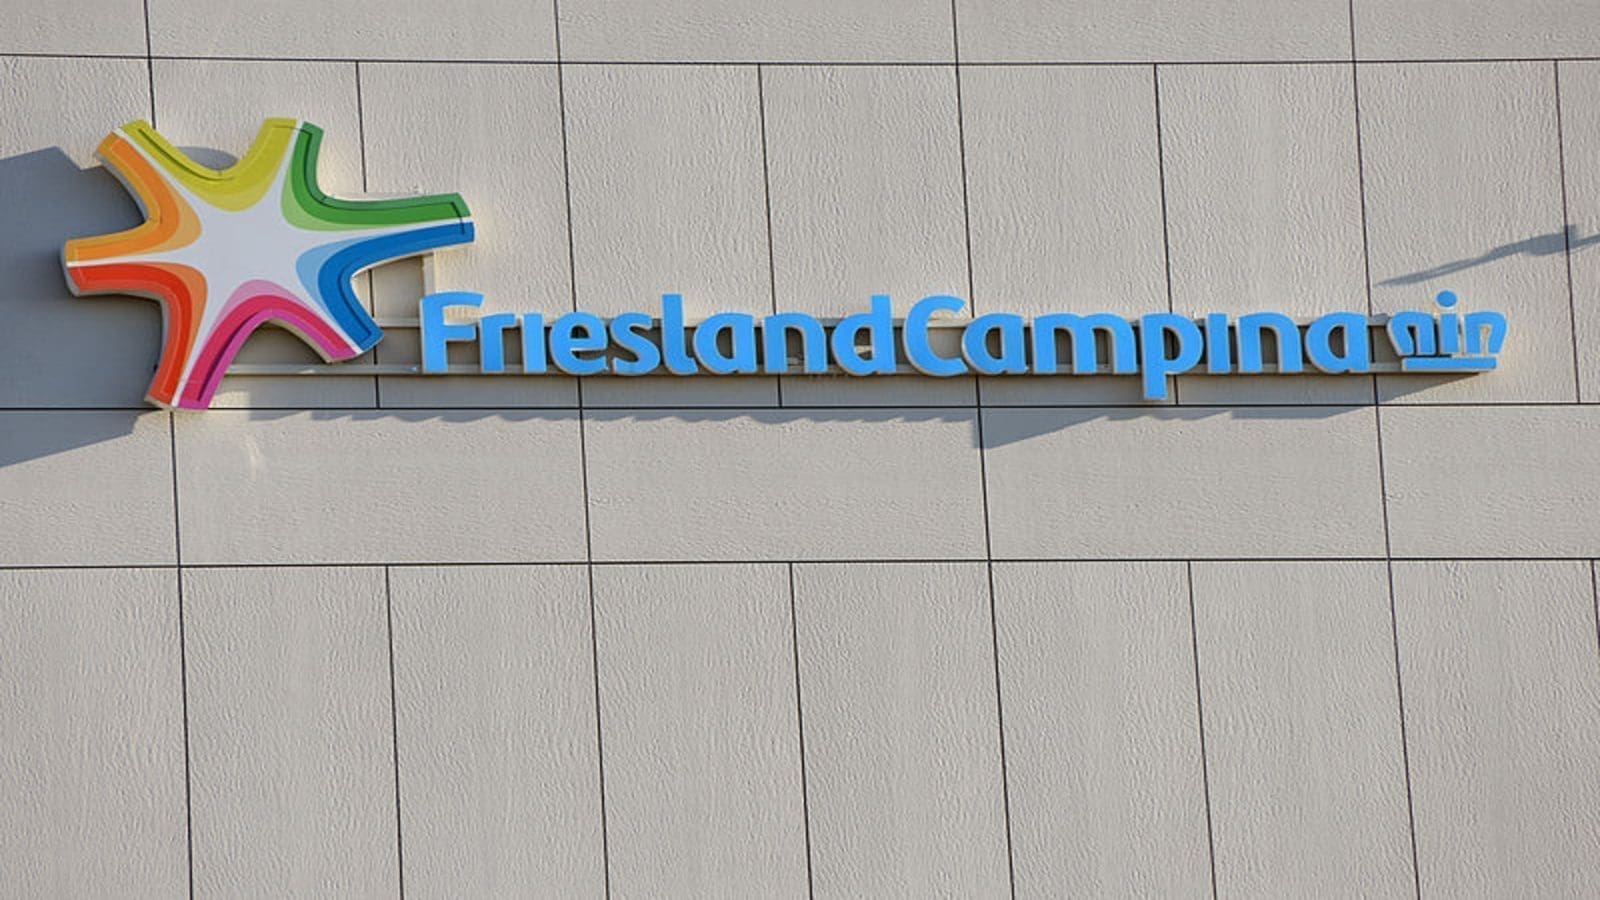 FrieslandCampina to reshape top structure aiming to improve business performance